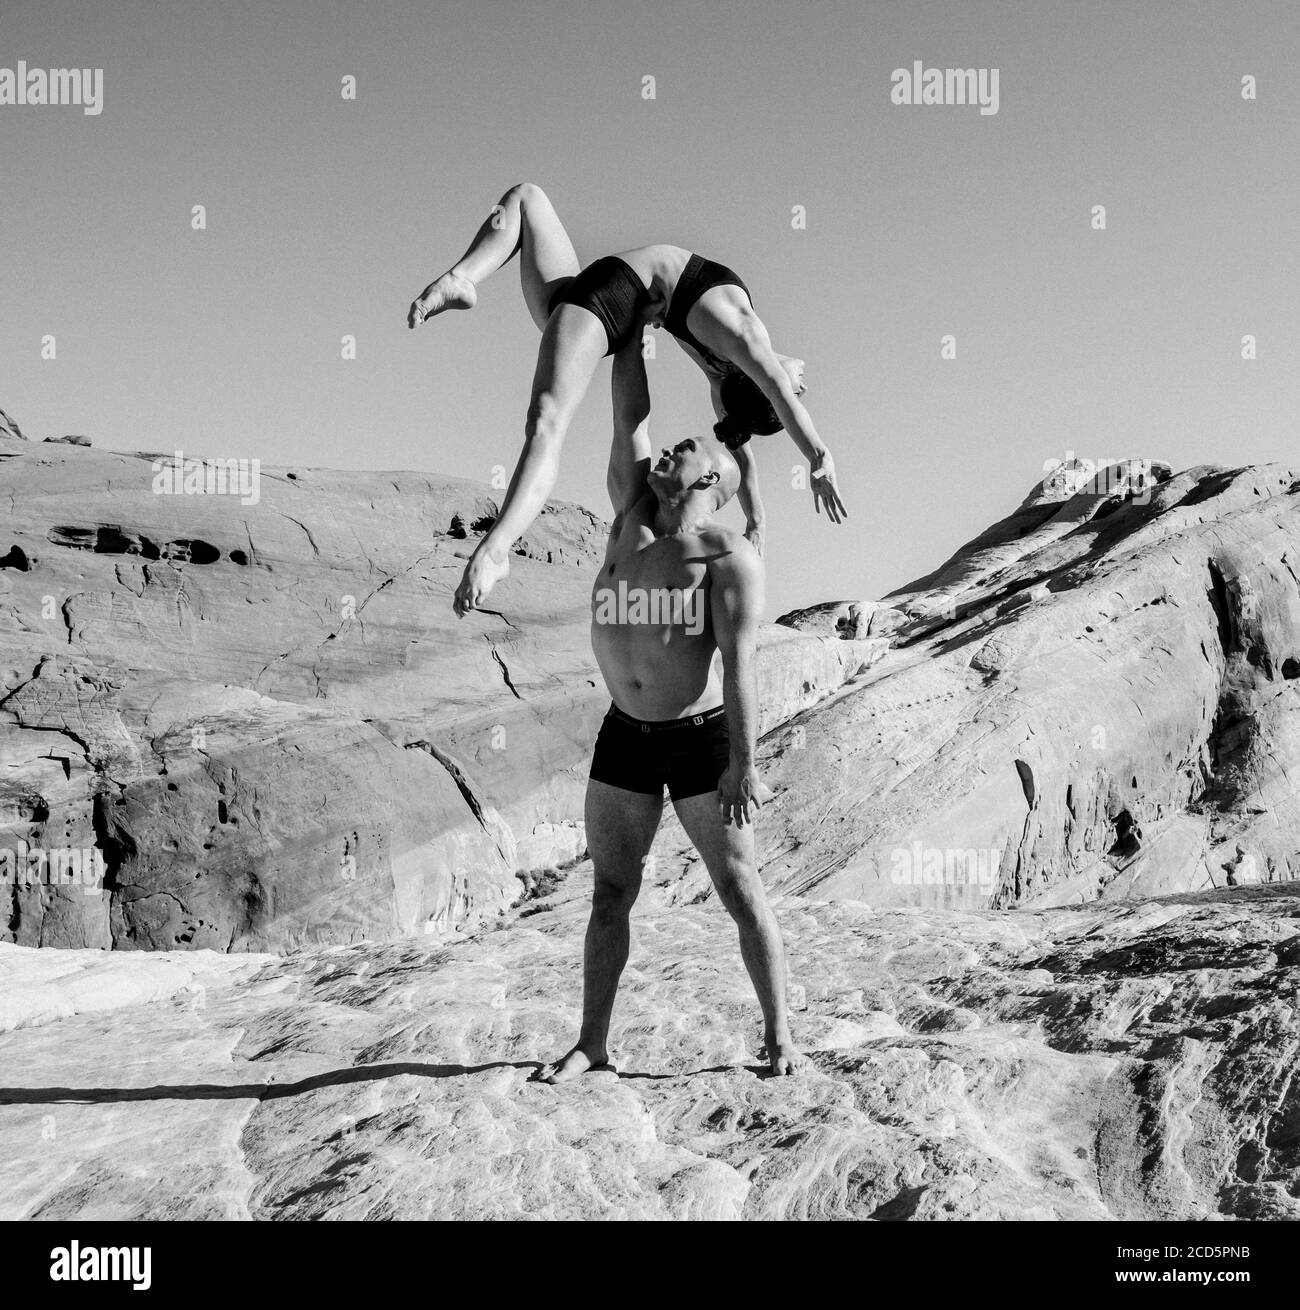 Balancing pair of gymnasts in desert,  State Park, Overton, Nevada, USA Stock Photo